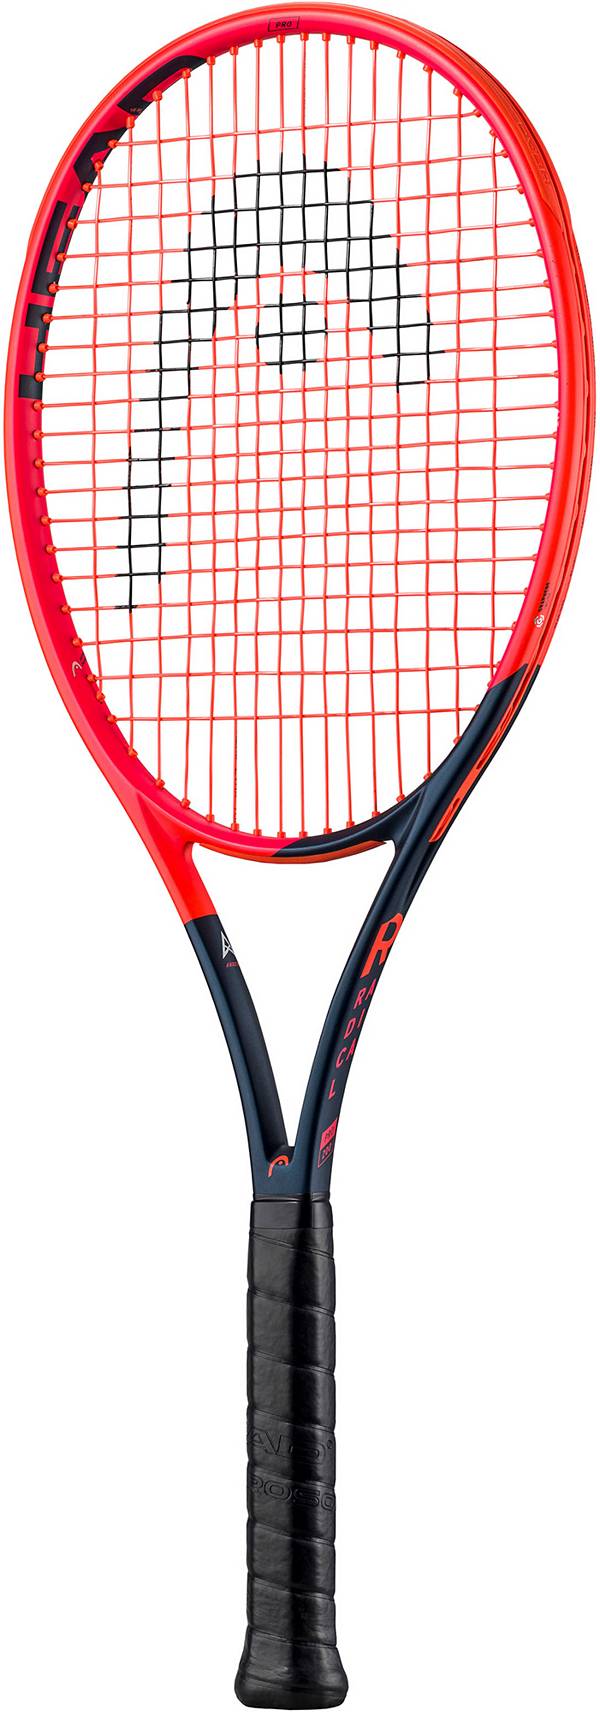 WILSON PRO SOFT OVERGRIP FOR TENNIS , IDEAL OVER GRIP FOR SQUASH PADEL  BADMINTON